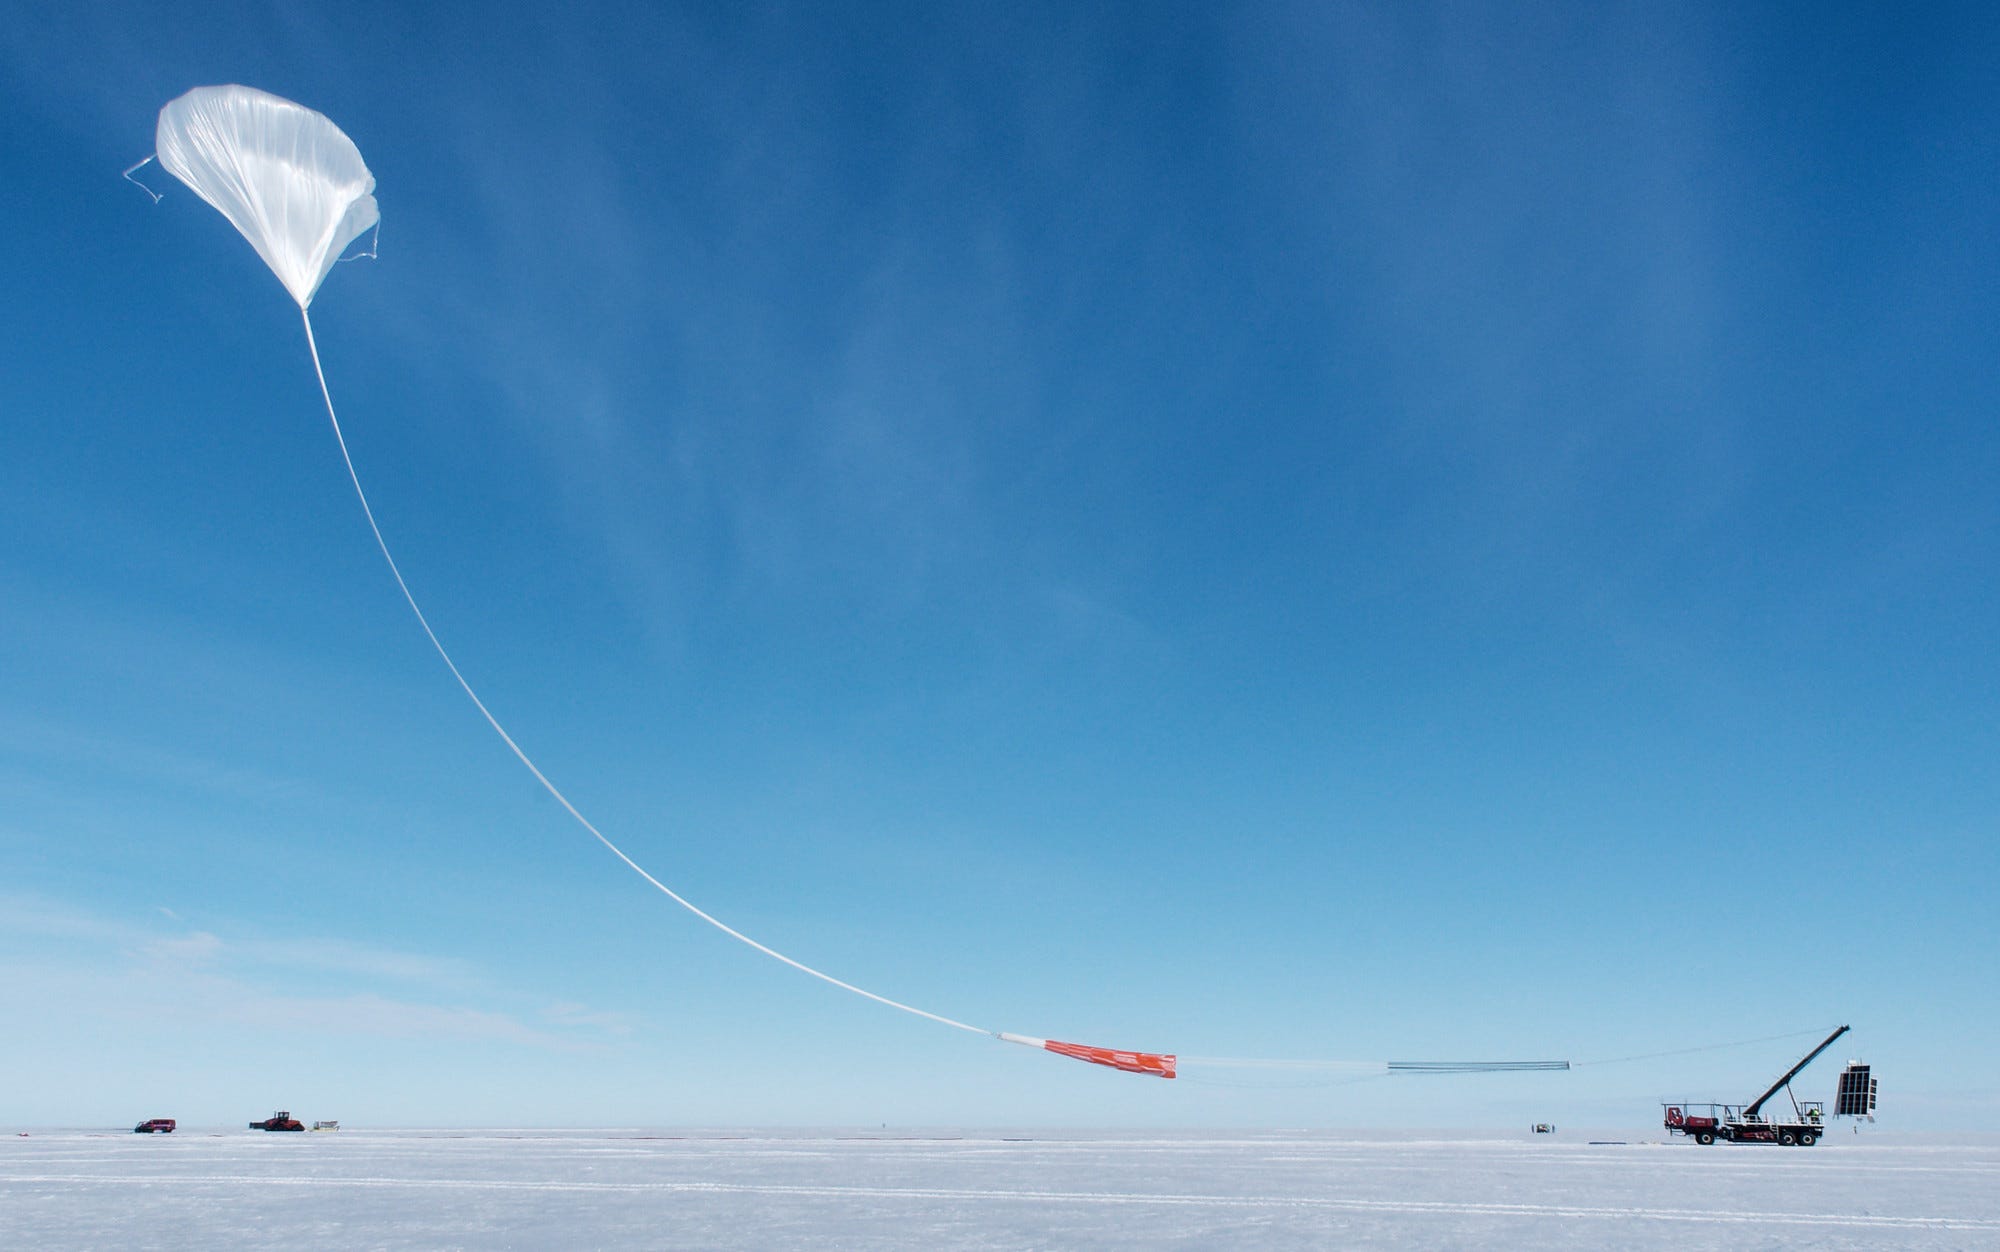 The 39 million cubic feet balloon just released ascending to take the payload from the launch vehicle (Image: NASA)